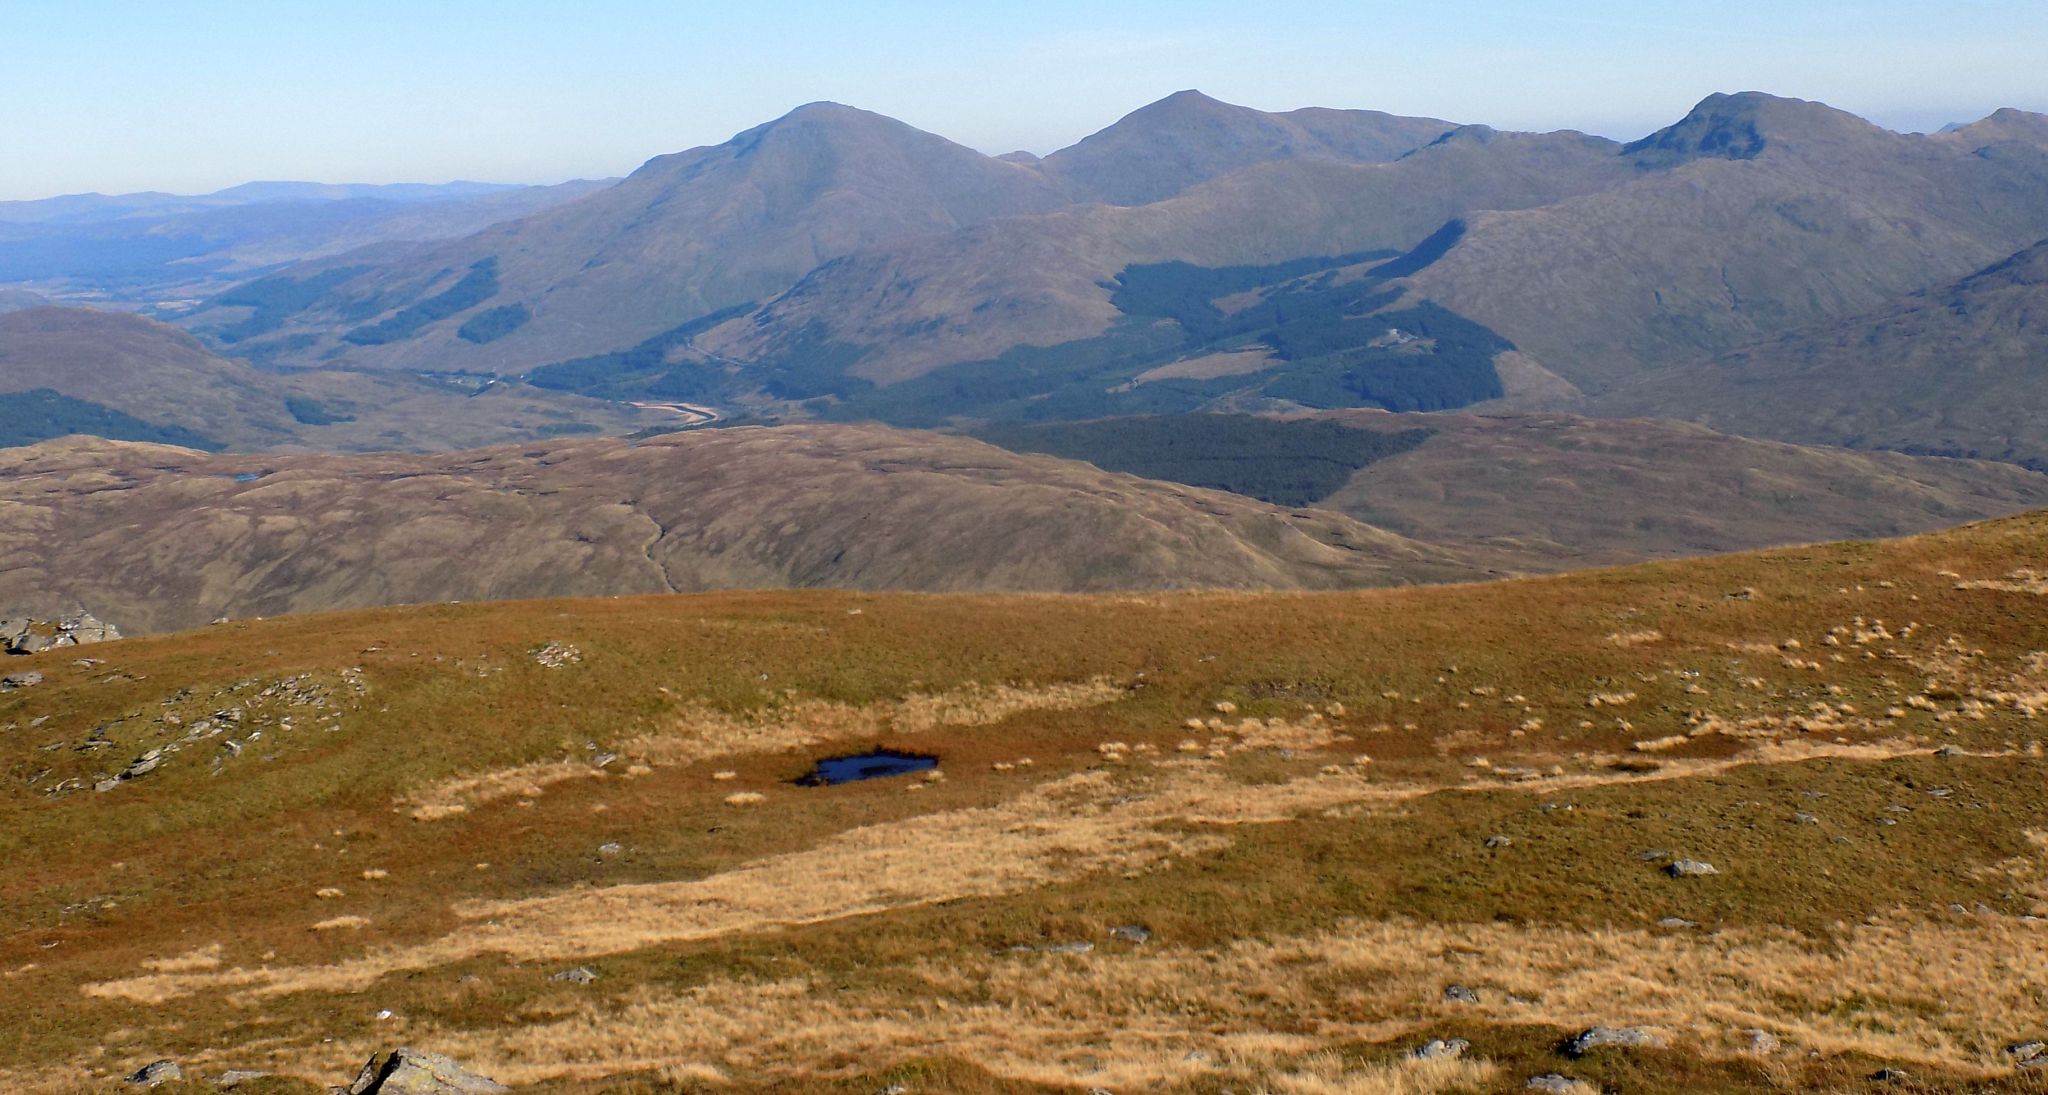 Ben More & Stob Binnein and Cruach Ardrain from West Highland Way on the approach to Tyndrum